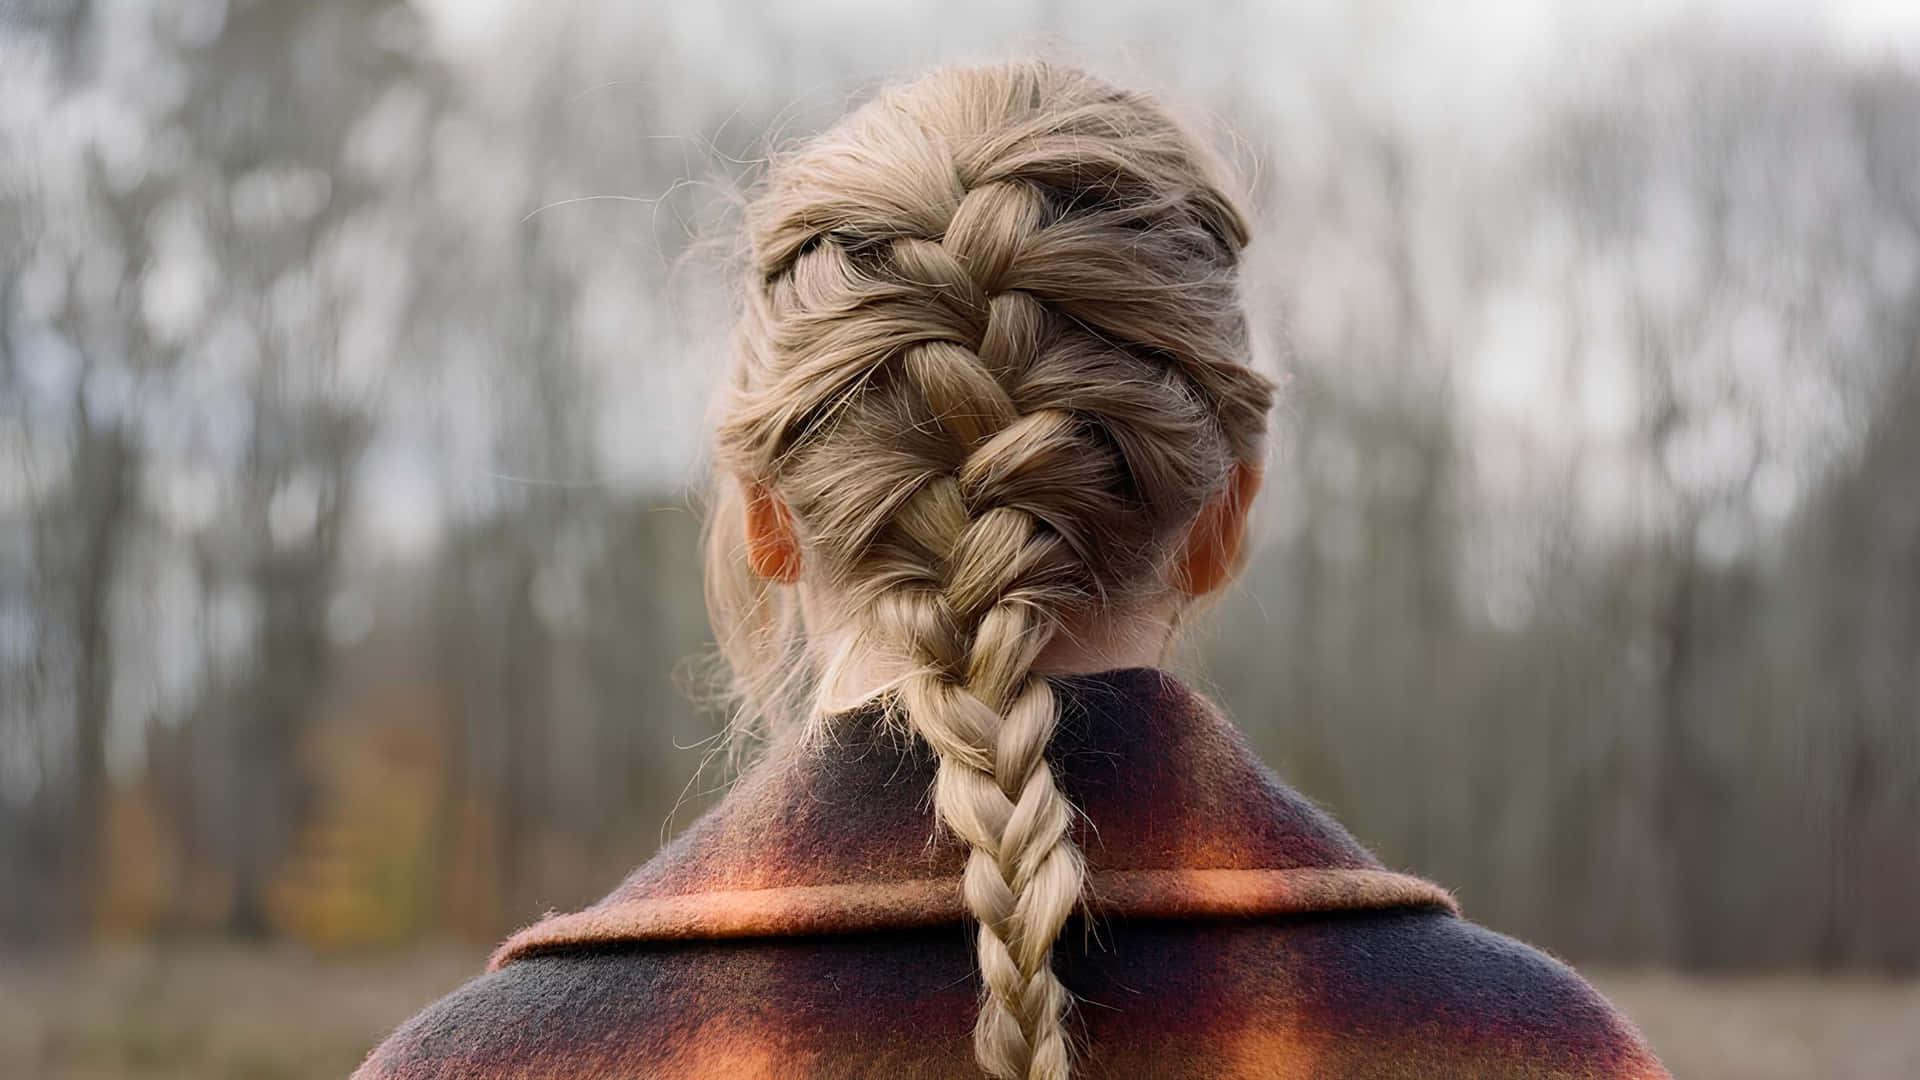 Womanwith Braided Hair Outdoors Wallpaper